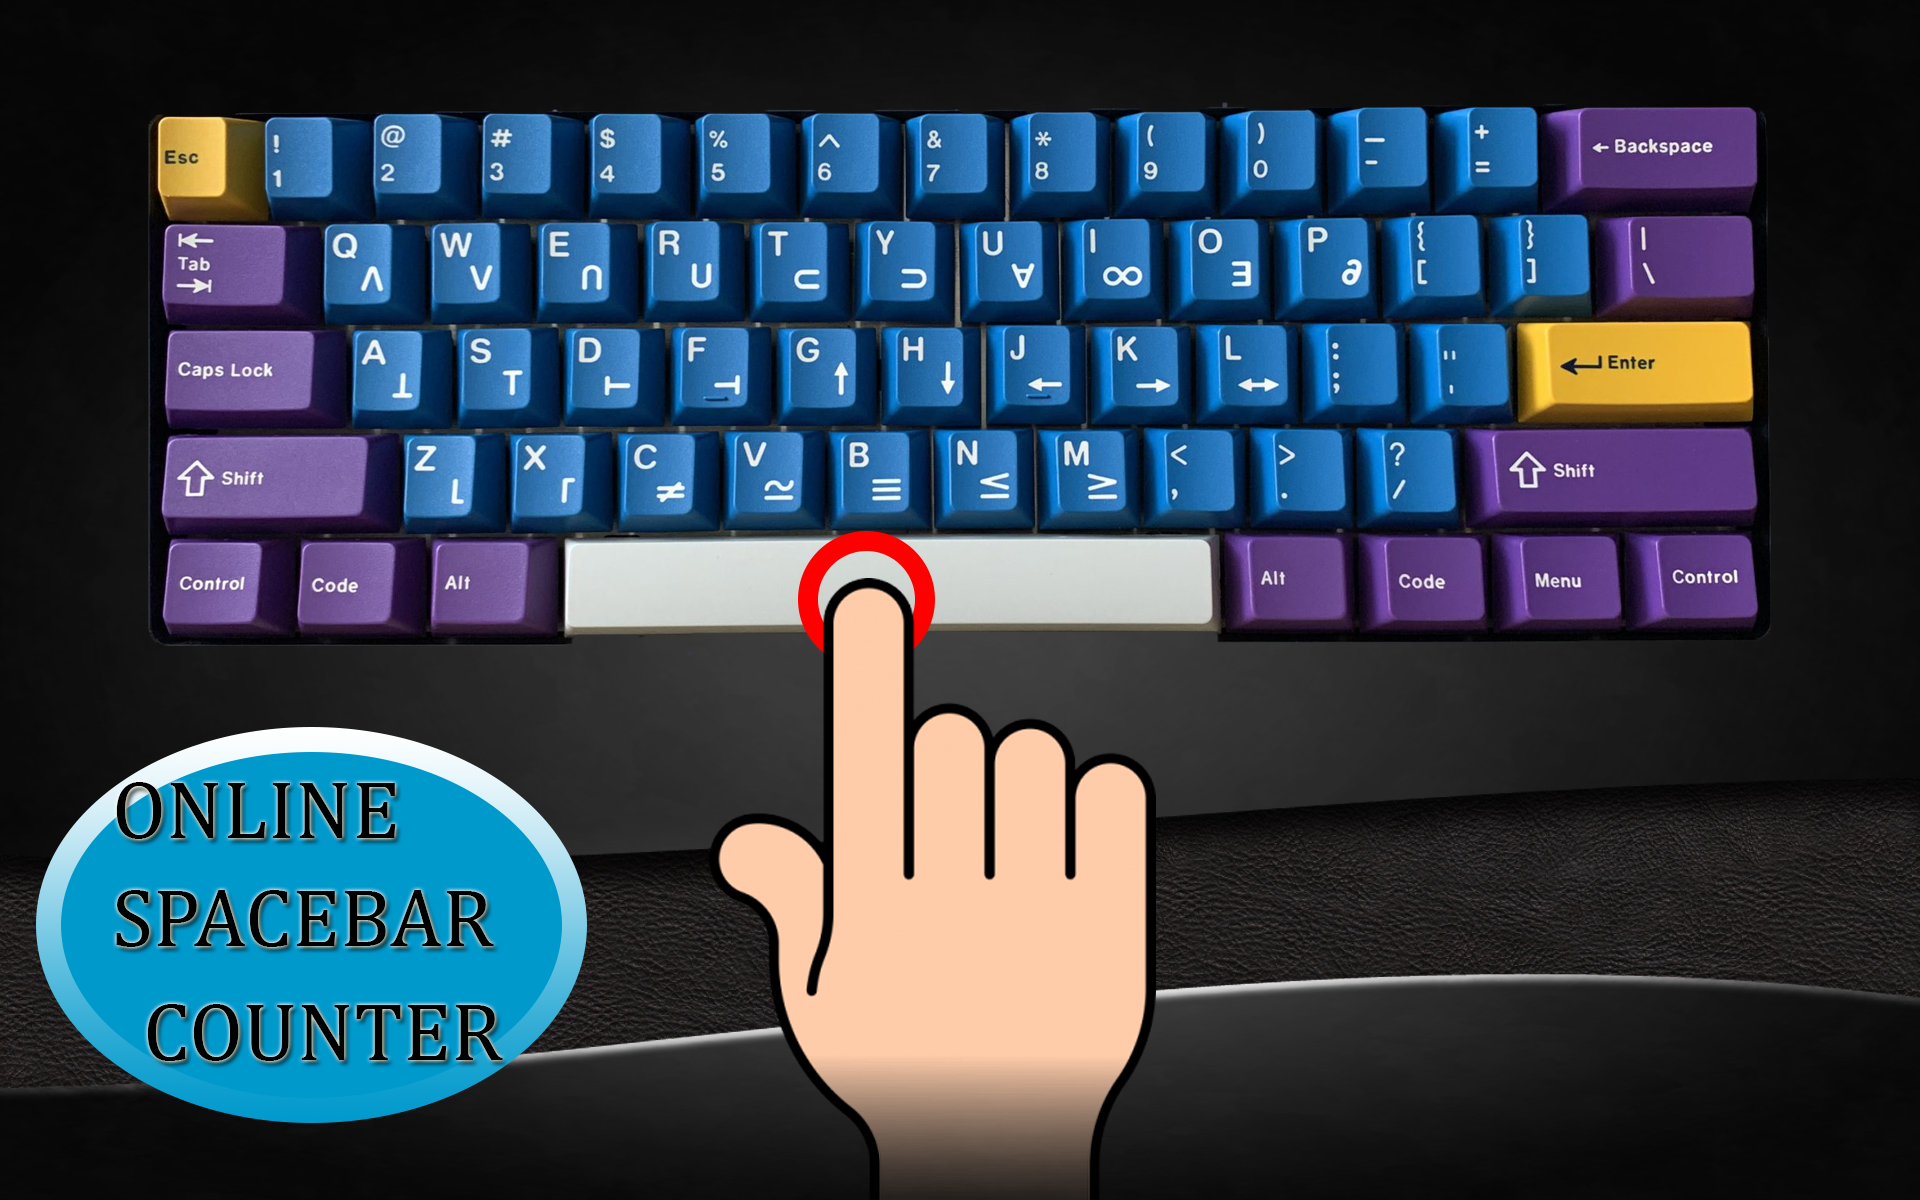 WITH THE SPACEBAR CLICKER LET'S IMPROVE YOUR GAMING SKILLS